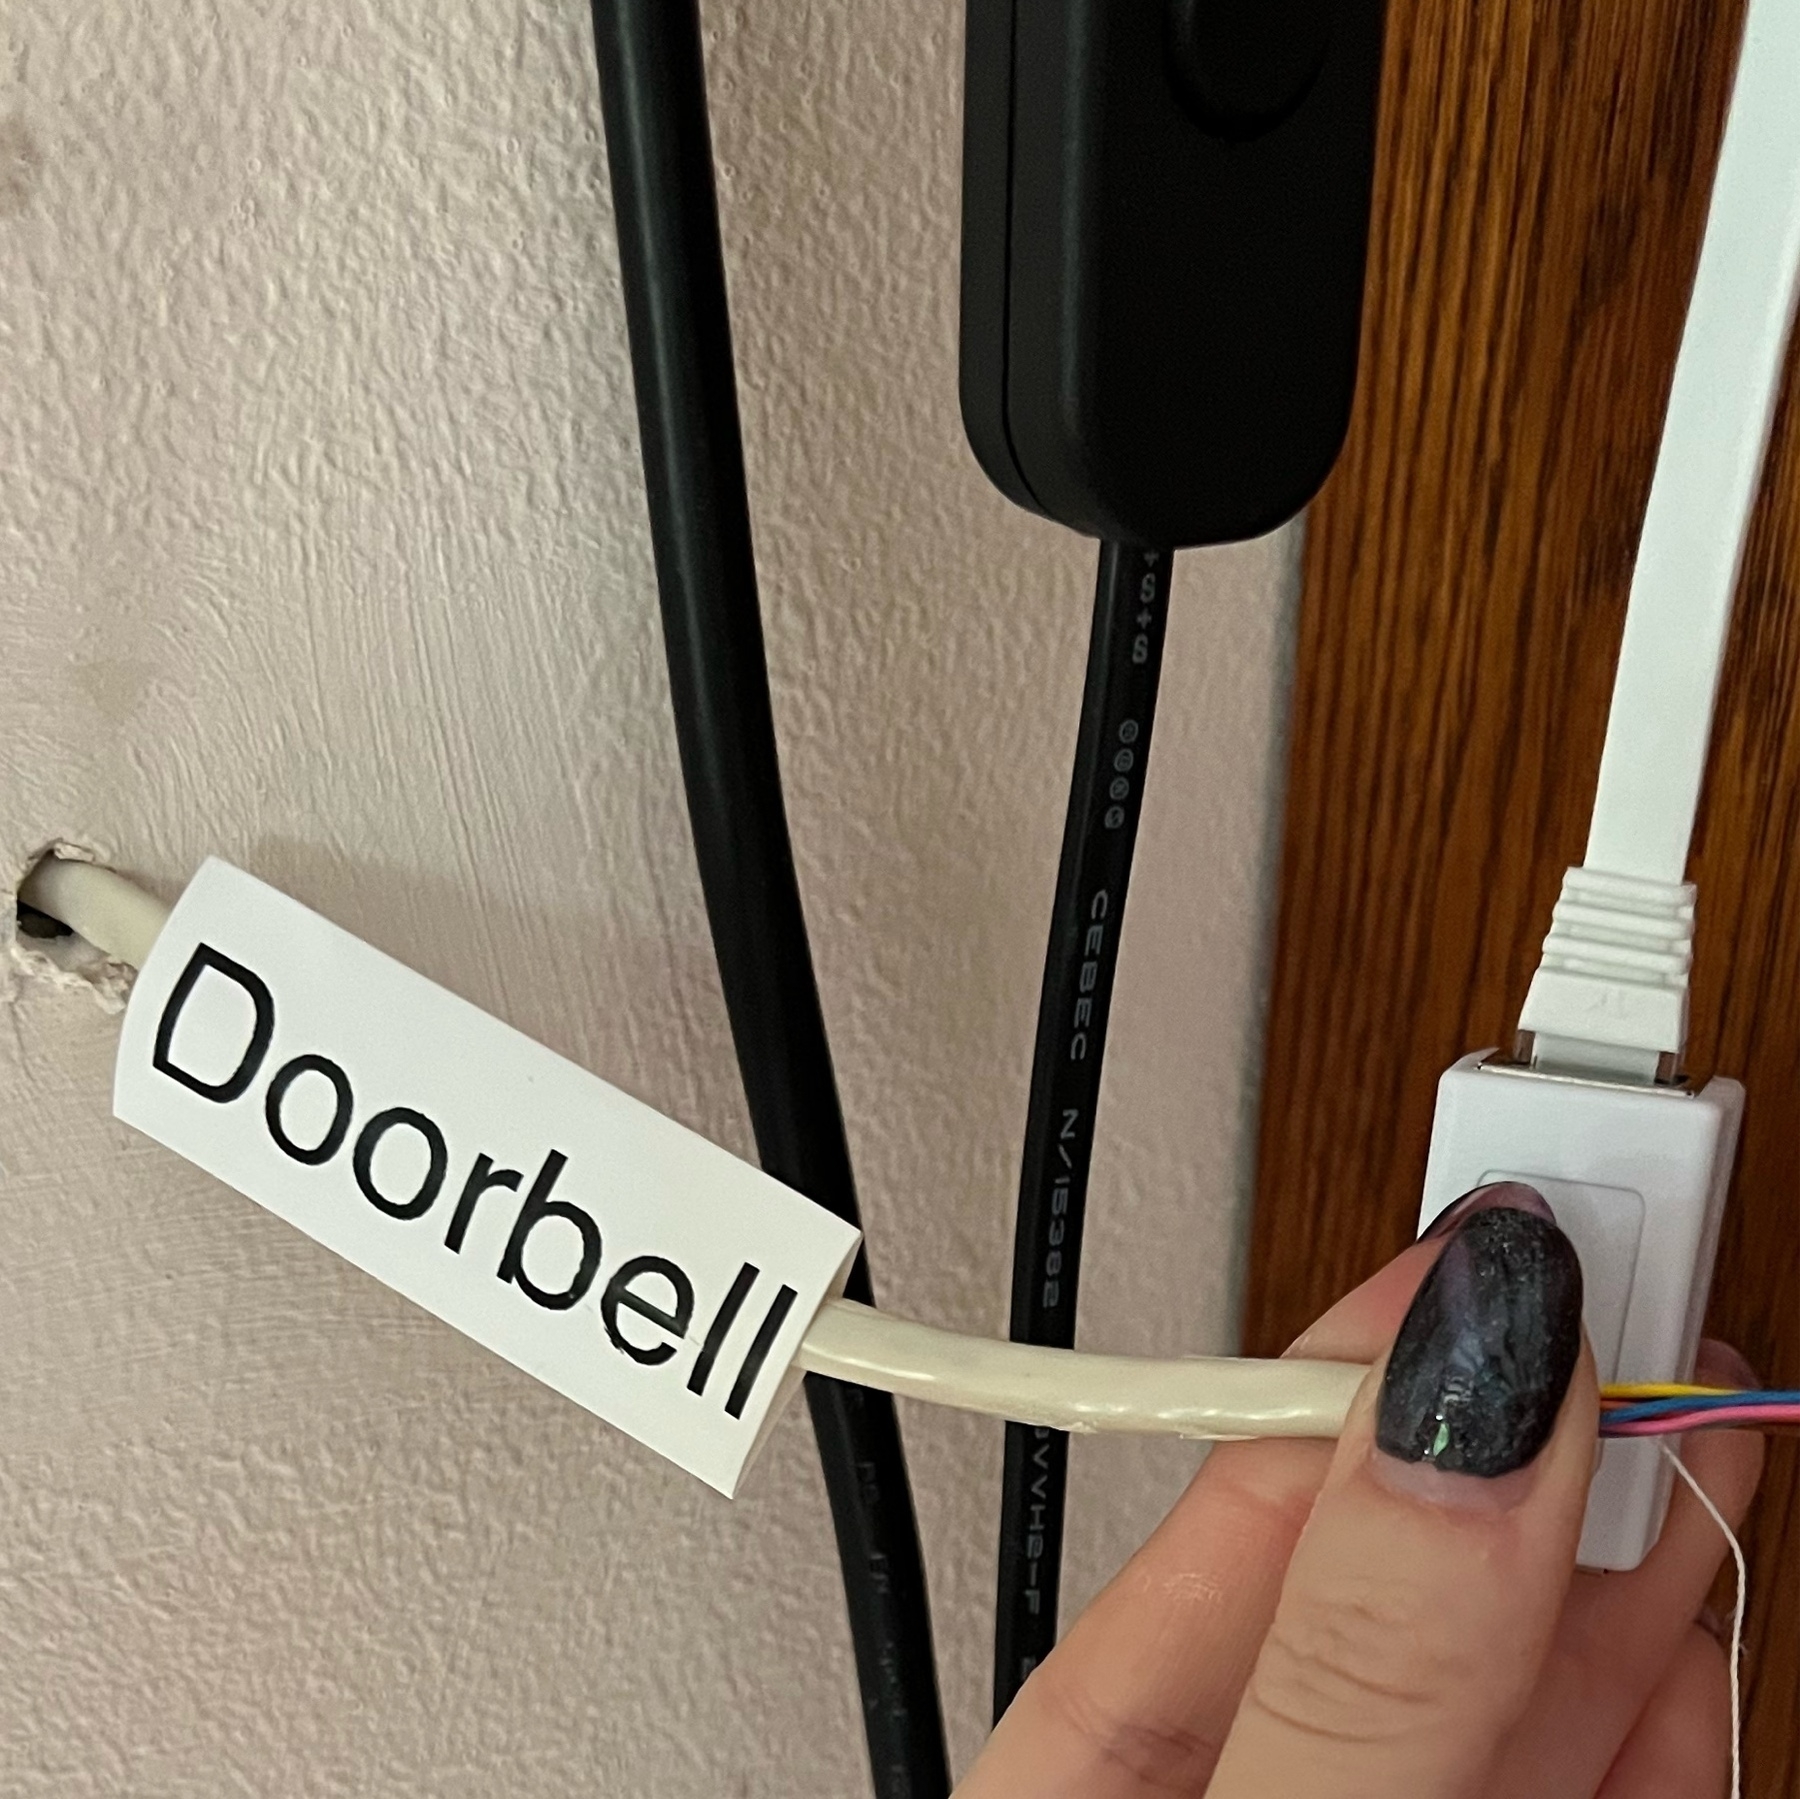 A cream wall with some grey cable casing and coloured wires coming out. A label on the cable says "Doorbell"